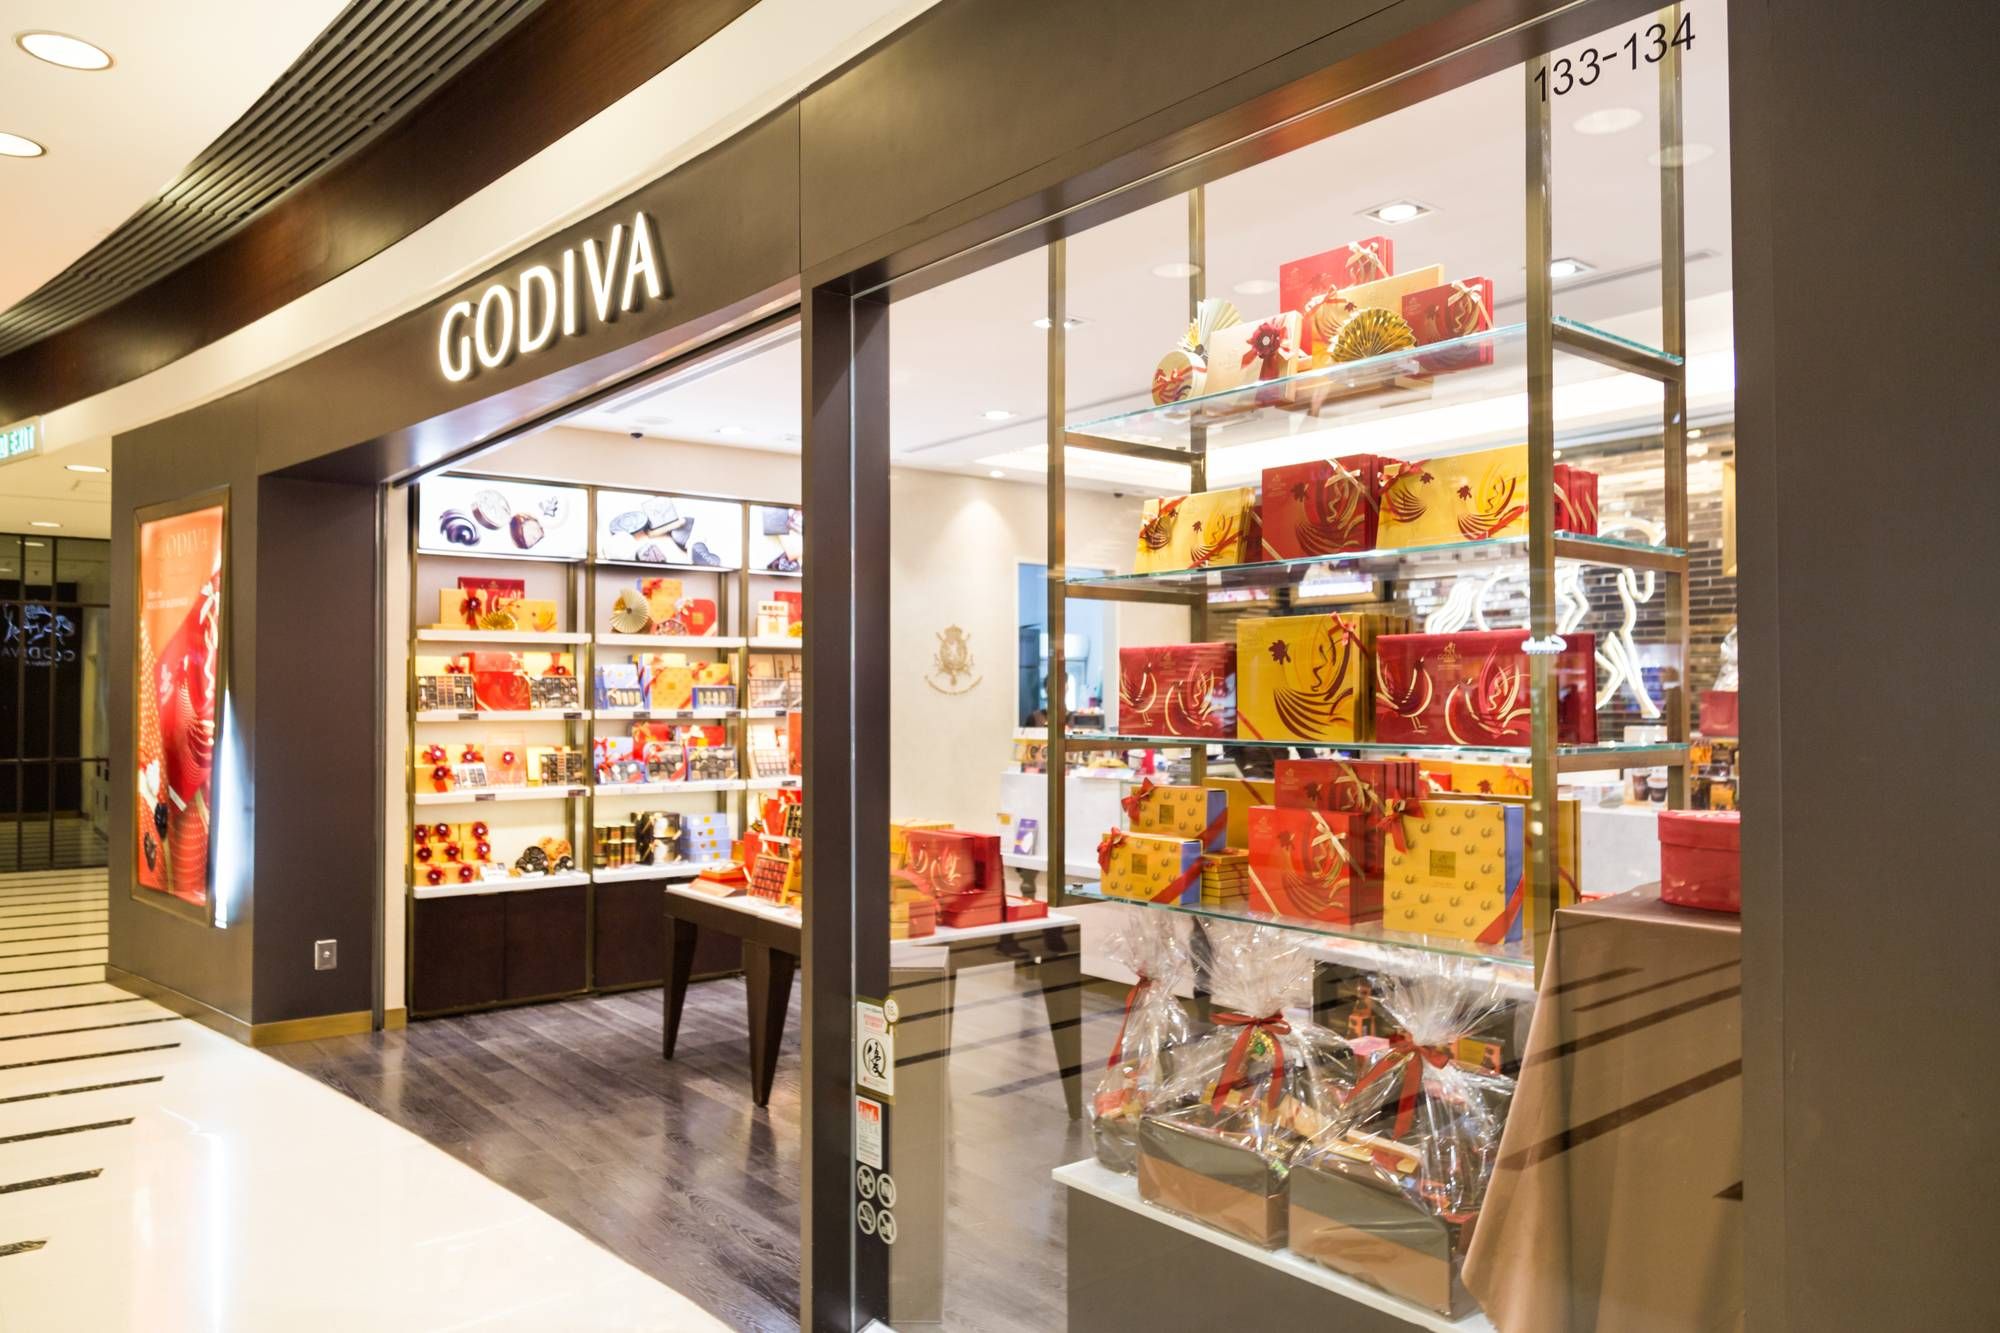 Godiva Belguim chocolate is allegedly mislabeled, according to consumers.